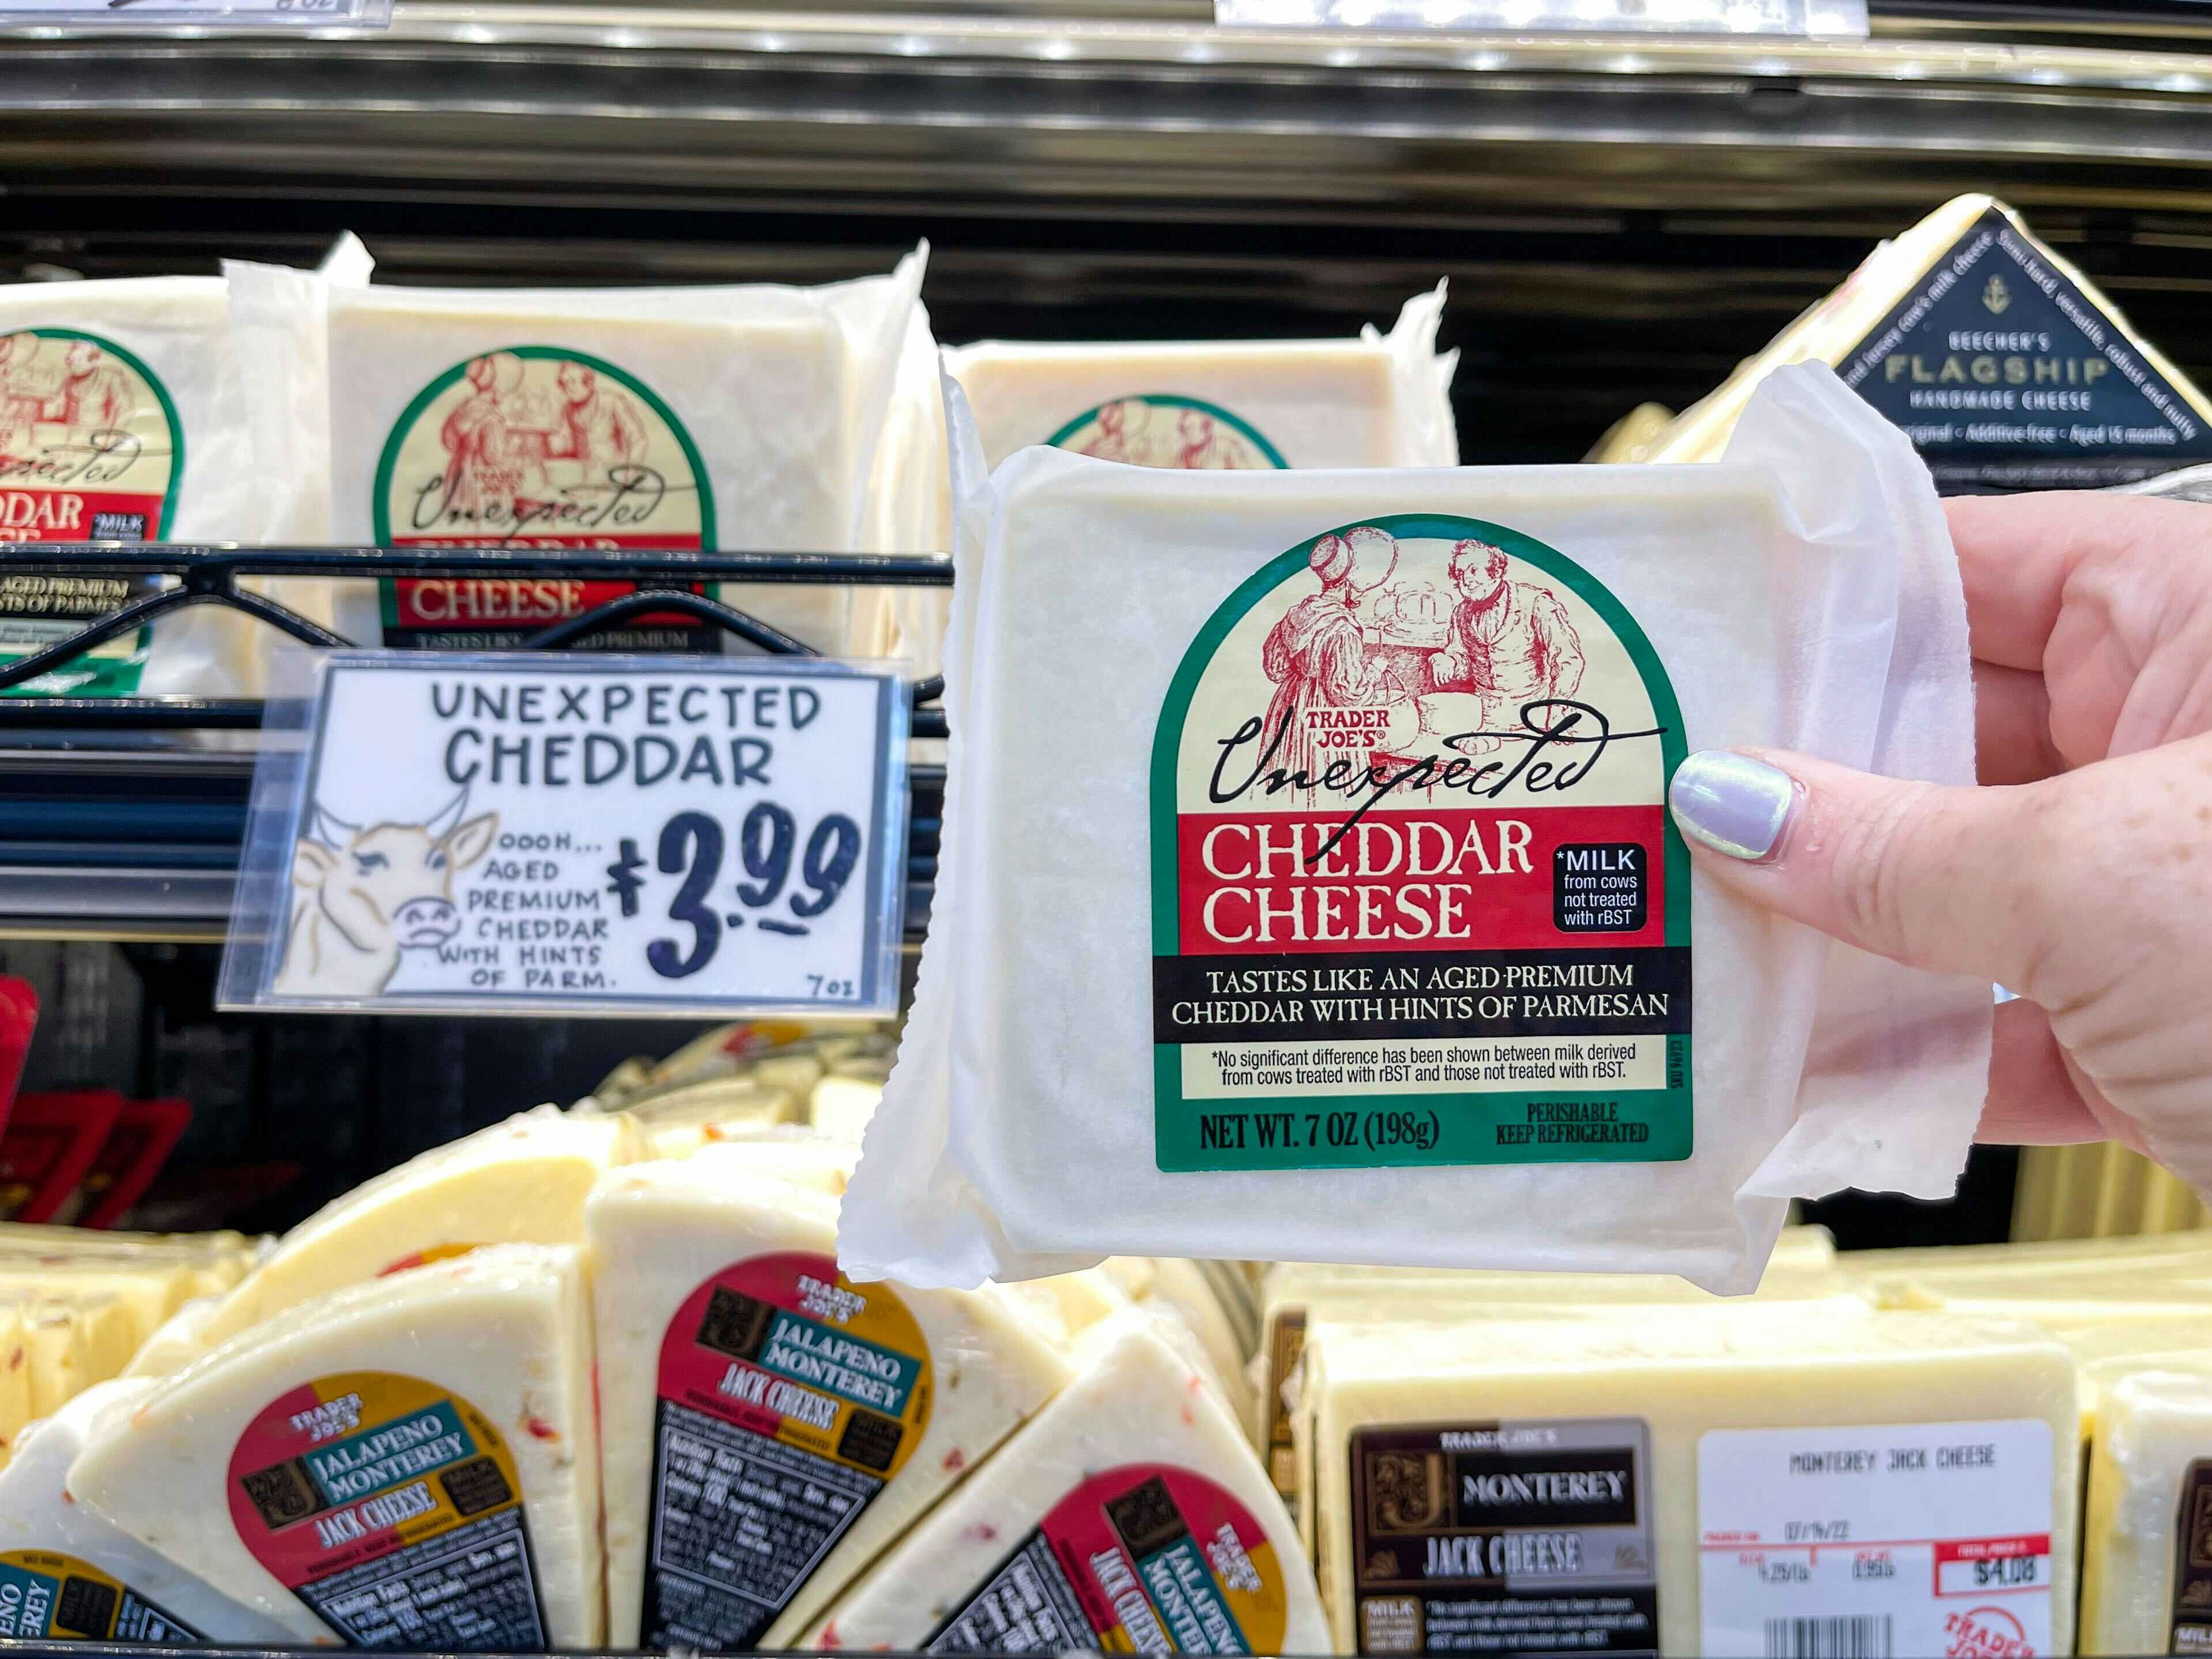 A person's hand holding a package of Trader Joe's Unexpected Cheddar Cheese in front of the price sign on the refrigerated shelf at Trader Joe's..